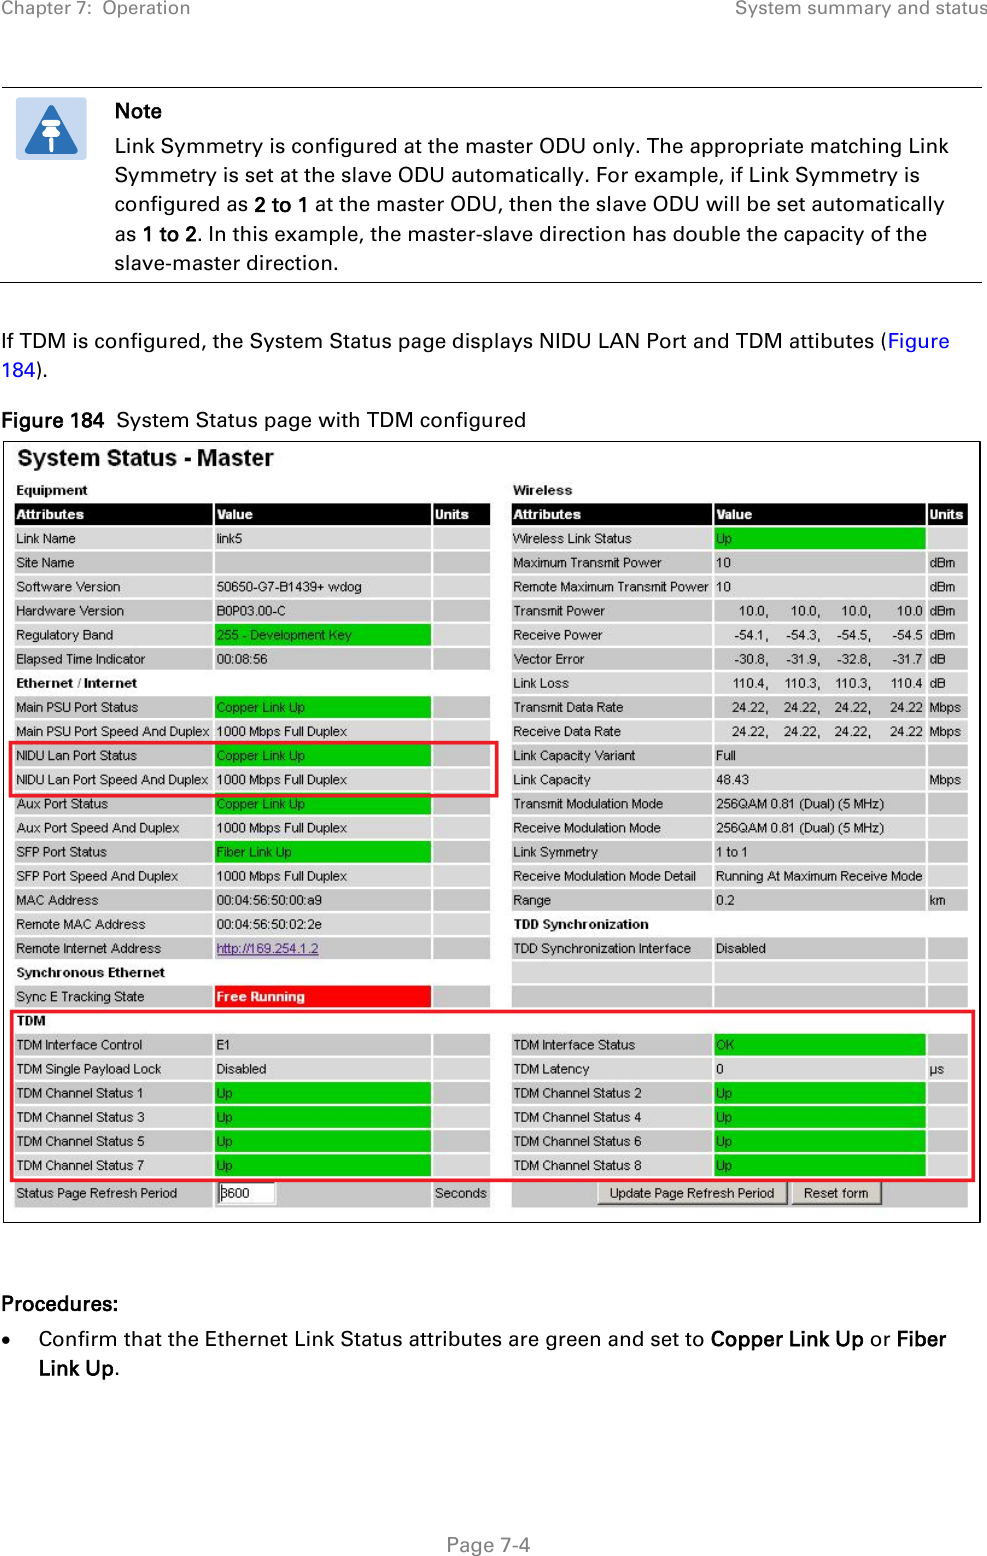 Chapter 7:  Operation System summary and status   Note Link Symmetry is configured at the master ODU only. The appropriate matching Link Symmetry is set at the slave ODU automatically. For example, if Link Symmetry is configured as 2 to 1 at the master ODU, then the slave ODU will be set automatically as 1 to 2. In this example, the master-slave direction has double the capacity of the slave-master direction.  If TDM is configured, the System Status page displays NIDU LAN Port and TDM attibutes (Figure 184). Figure 184  System Status page with TDM configured   Procedures: • Confirm that the Ethernet Link Status attributes are green and set to Copper Link Up or Fiber Link Up.   Page 7-4 